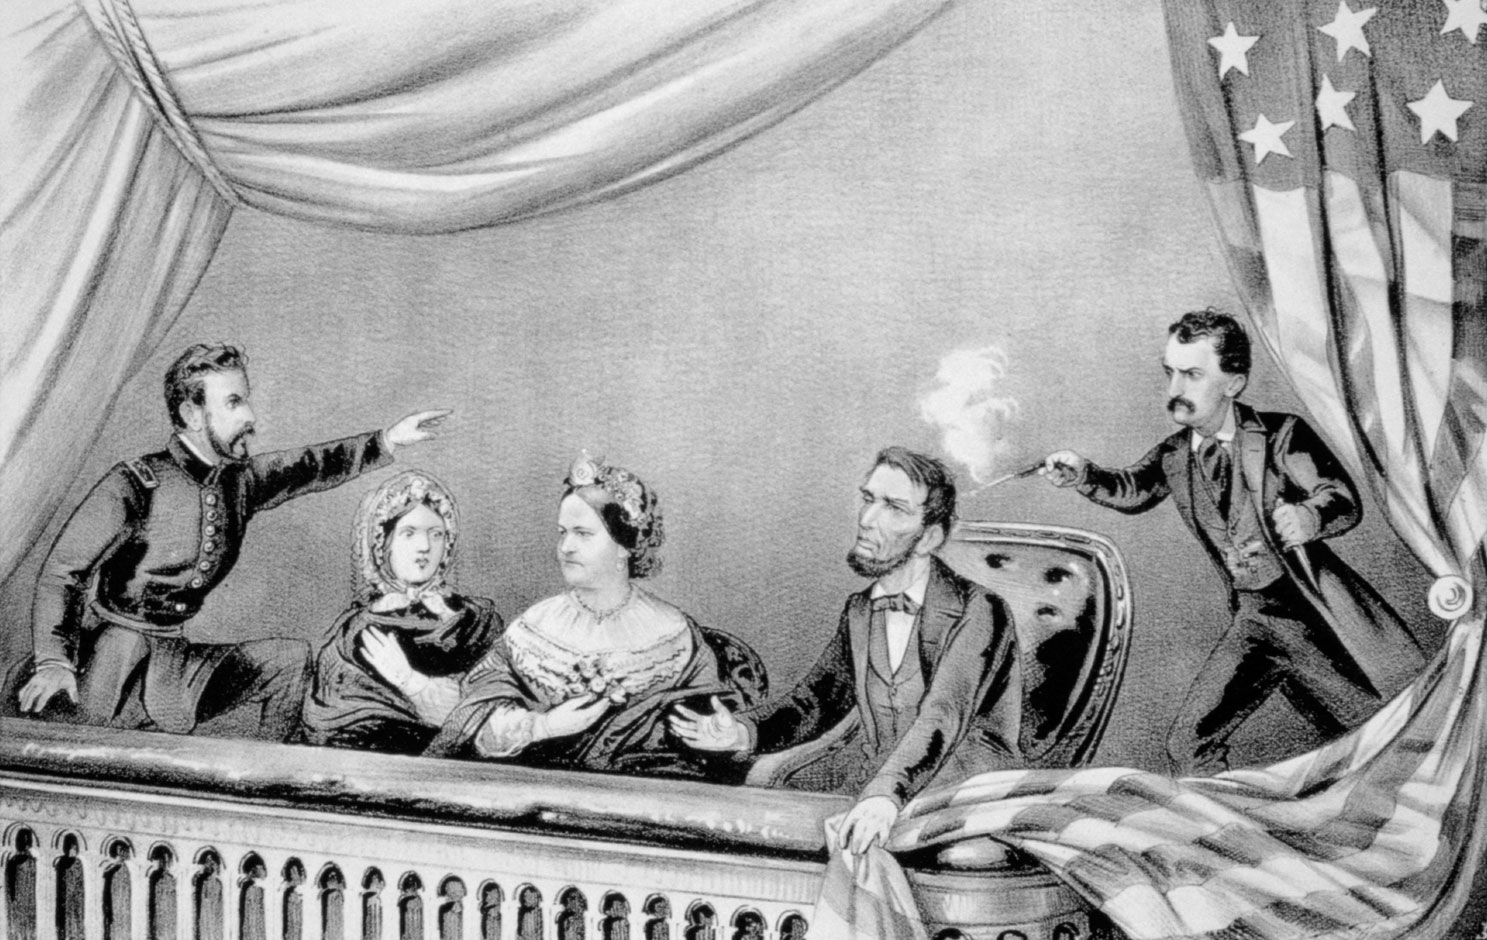 assassination-Pres-John-Wilkes-Booth-Abraham-Lincoln-April-14-1865